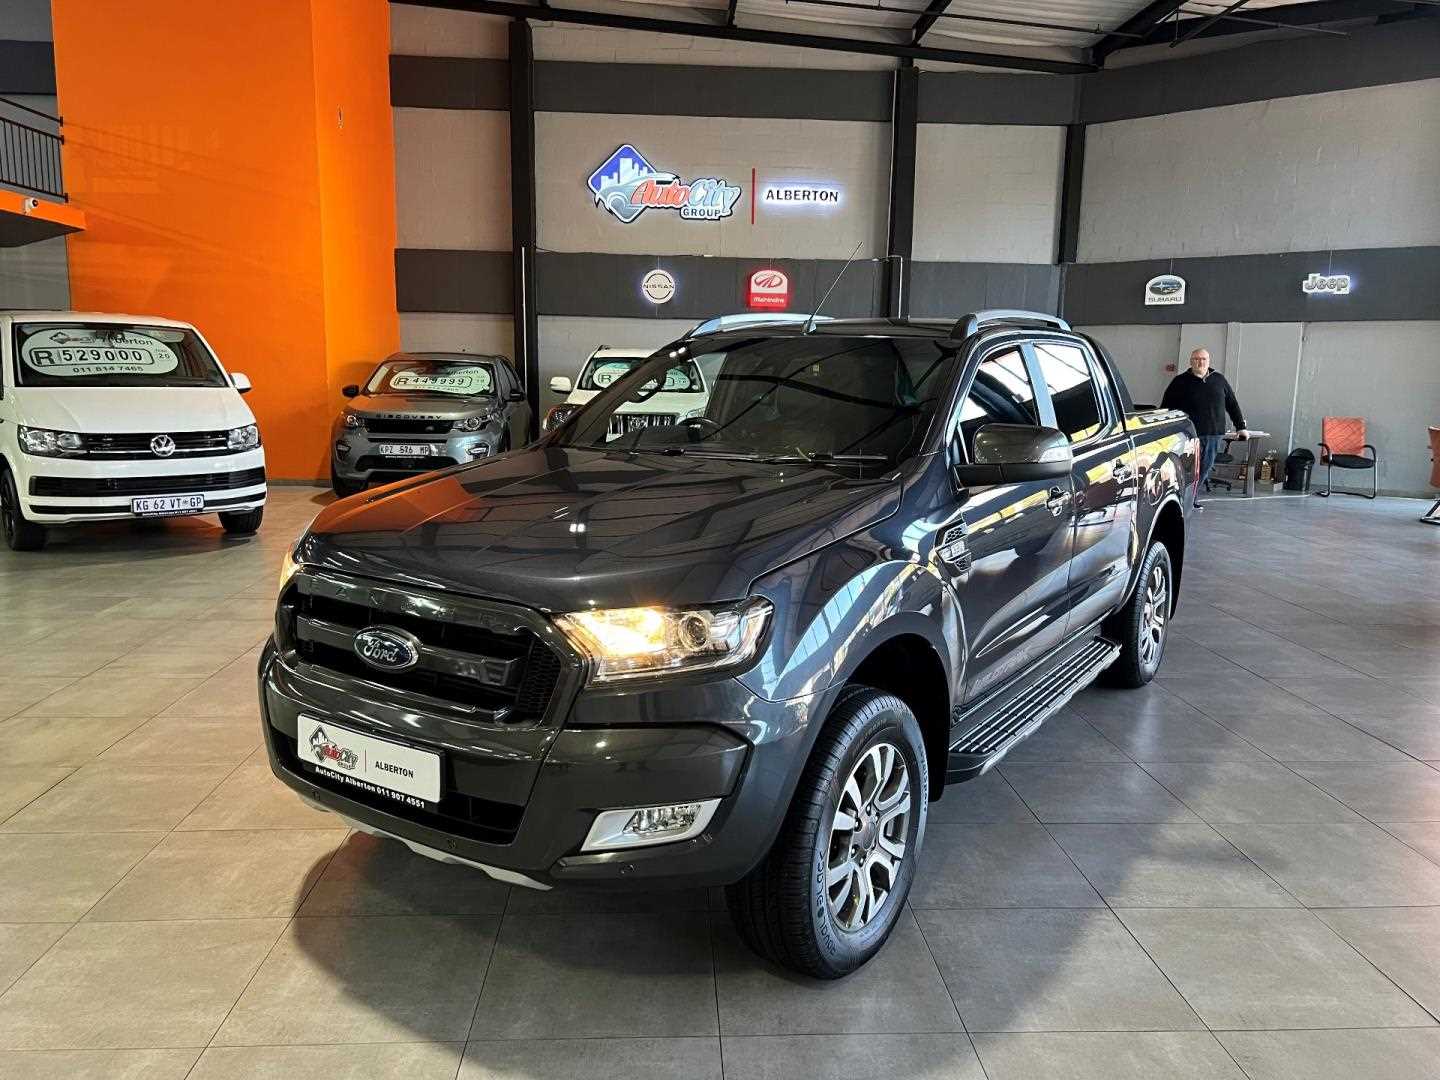 2019 Ford Ranger  3.2 Tdci Wildtrak 4X4 D/cab At for sale - 337703